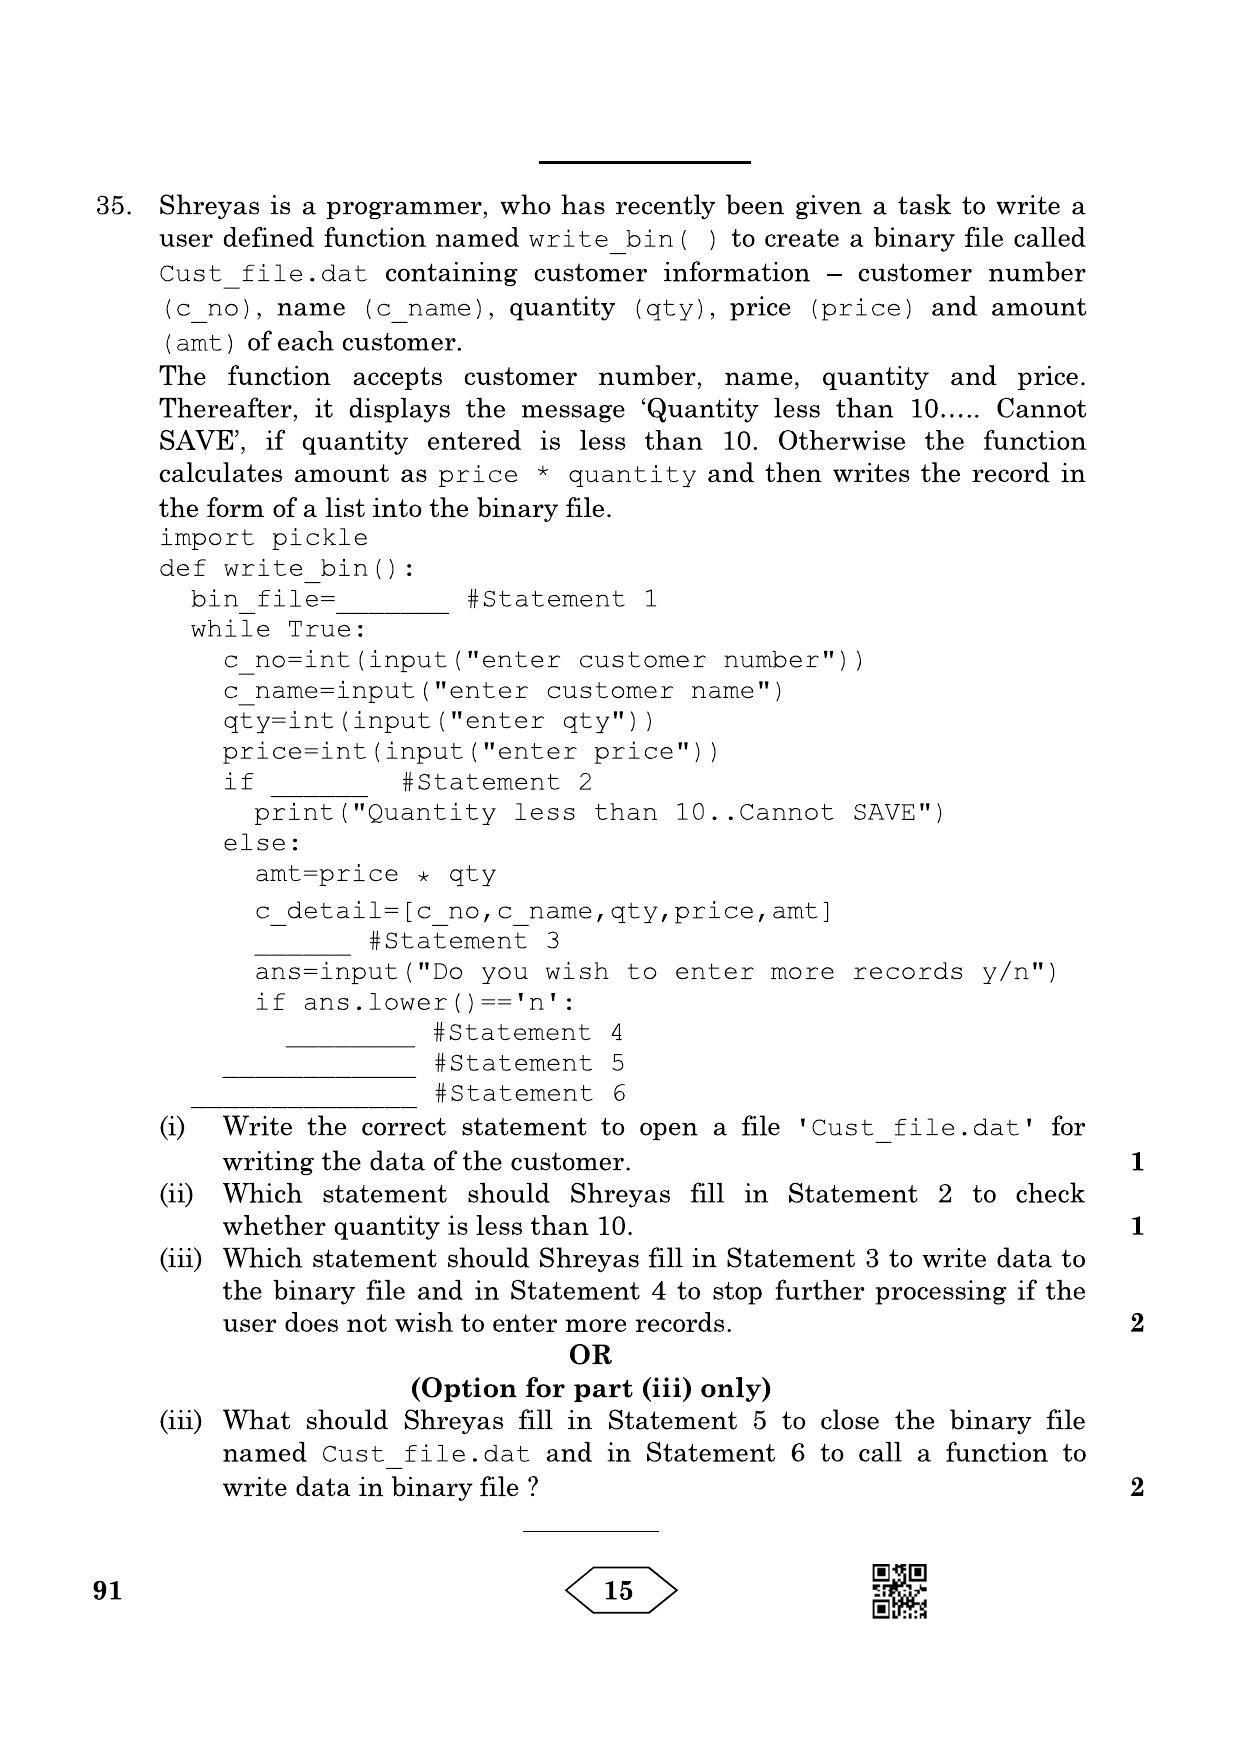 CBSE Class 12 91_Computer Science 2023 Question Paper - Page 15